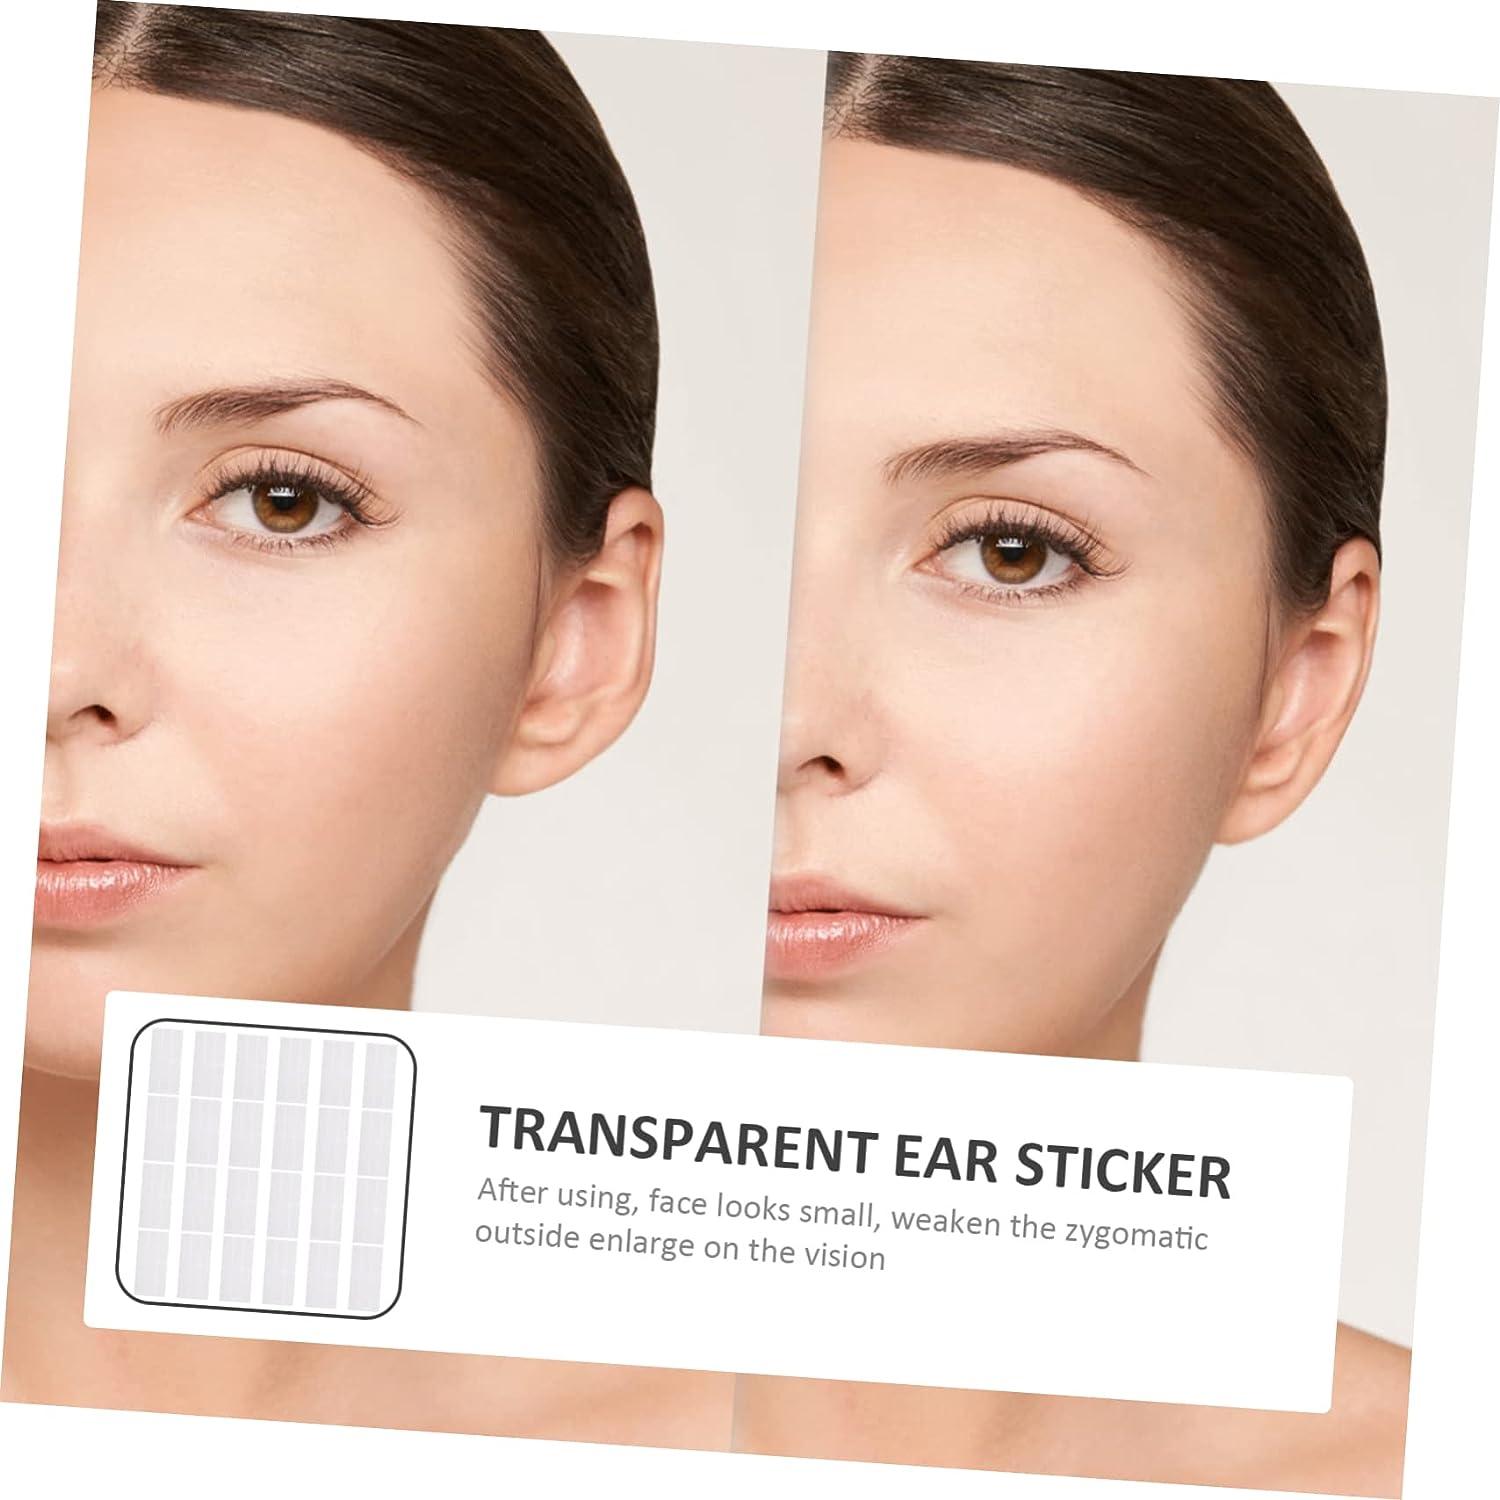 Ear Corrector, Contain 30 Ear Tape, Solve Big Ear Problem with Ear Stickers  by Pinning Back Ears, Cosmetic Aesthetic Correctors for Prominent Ears